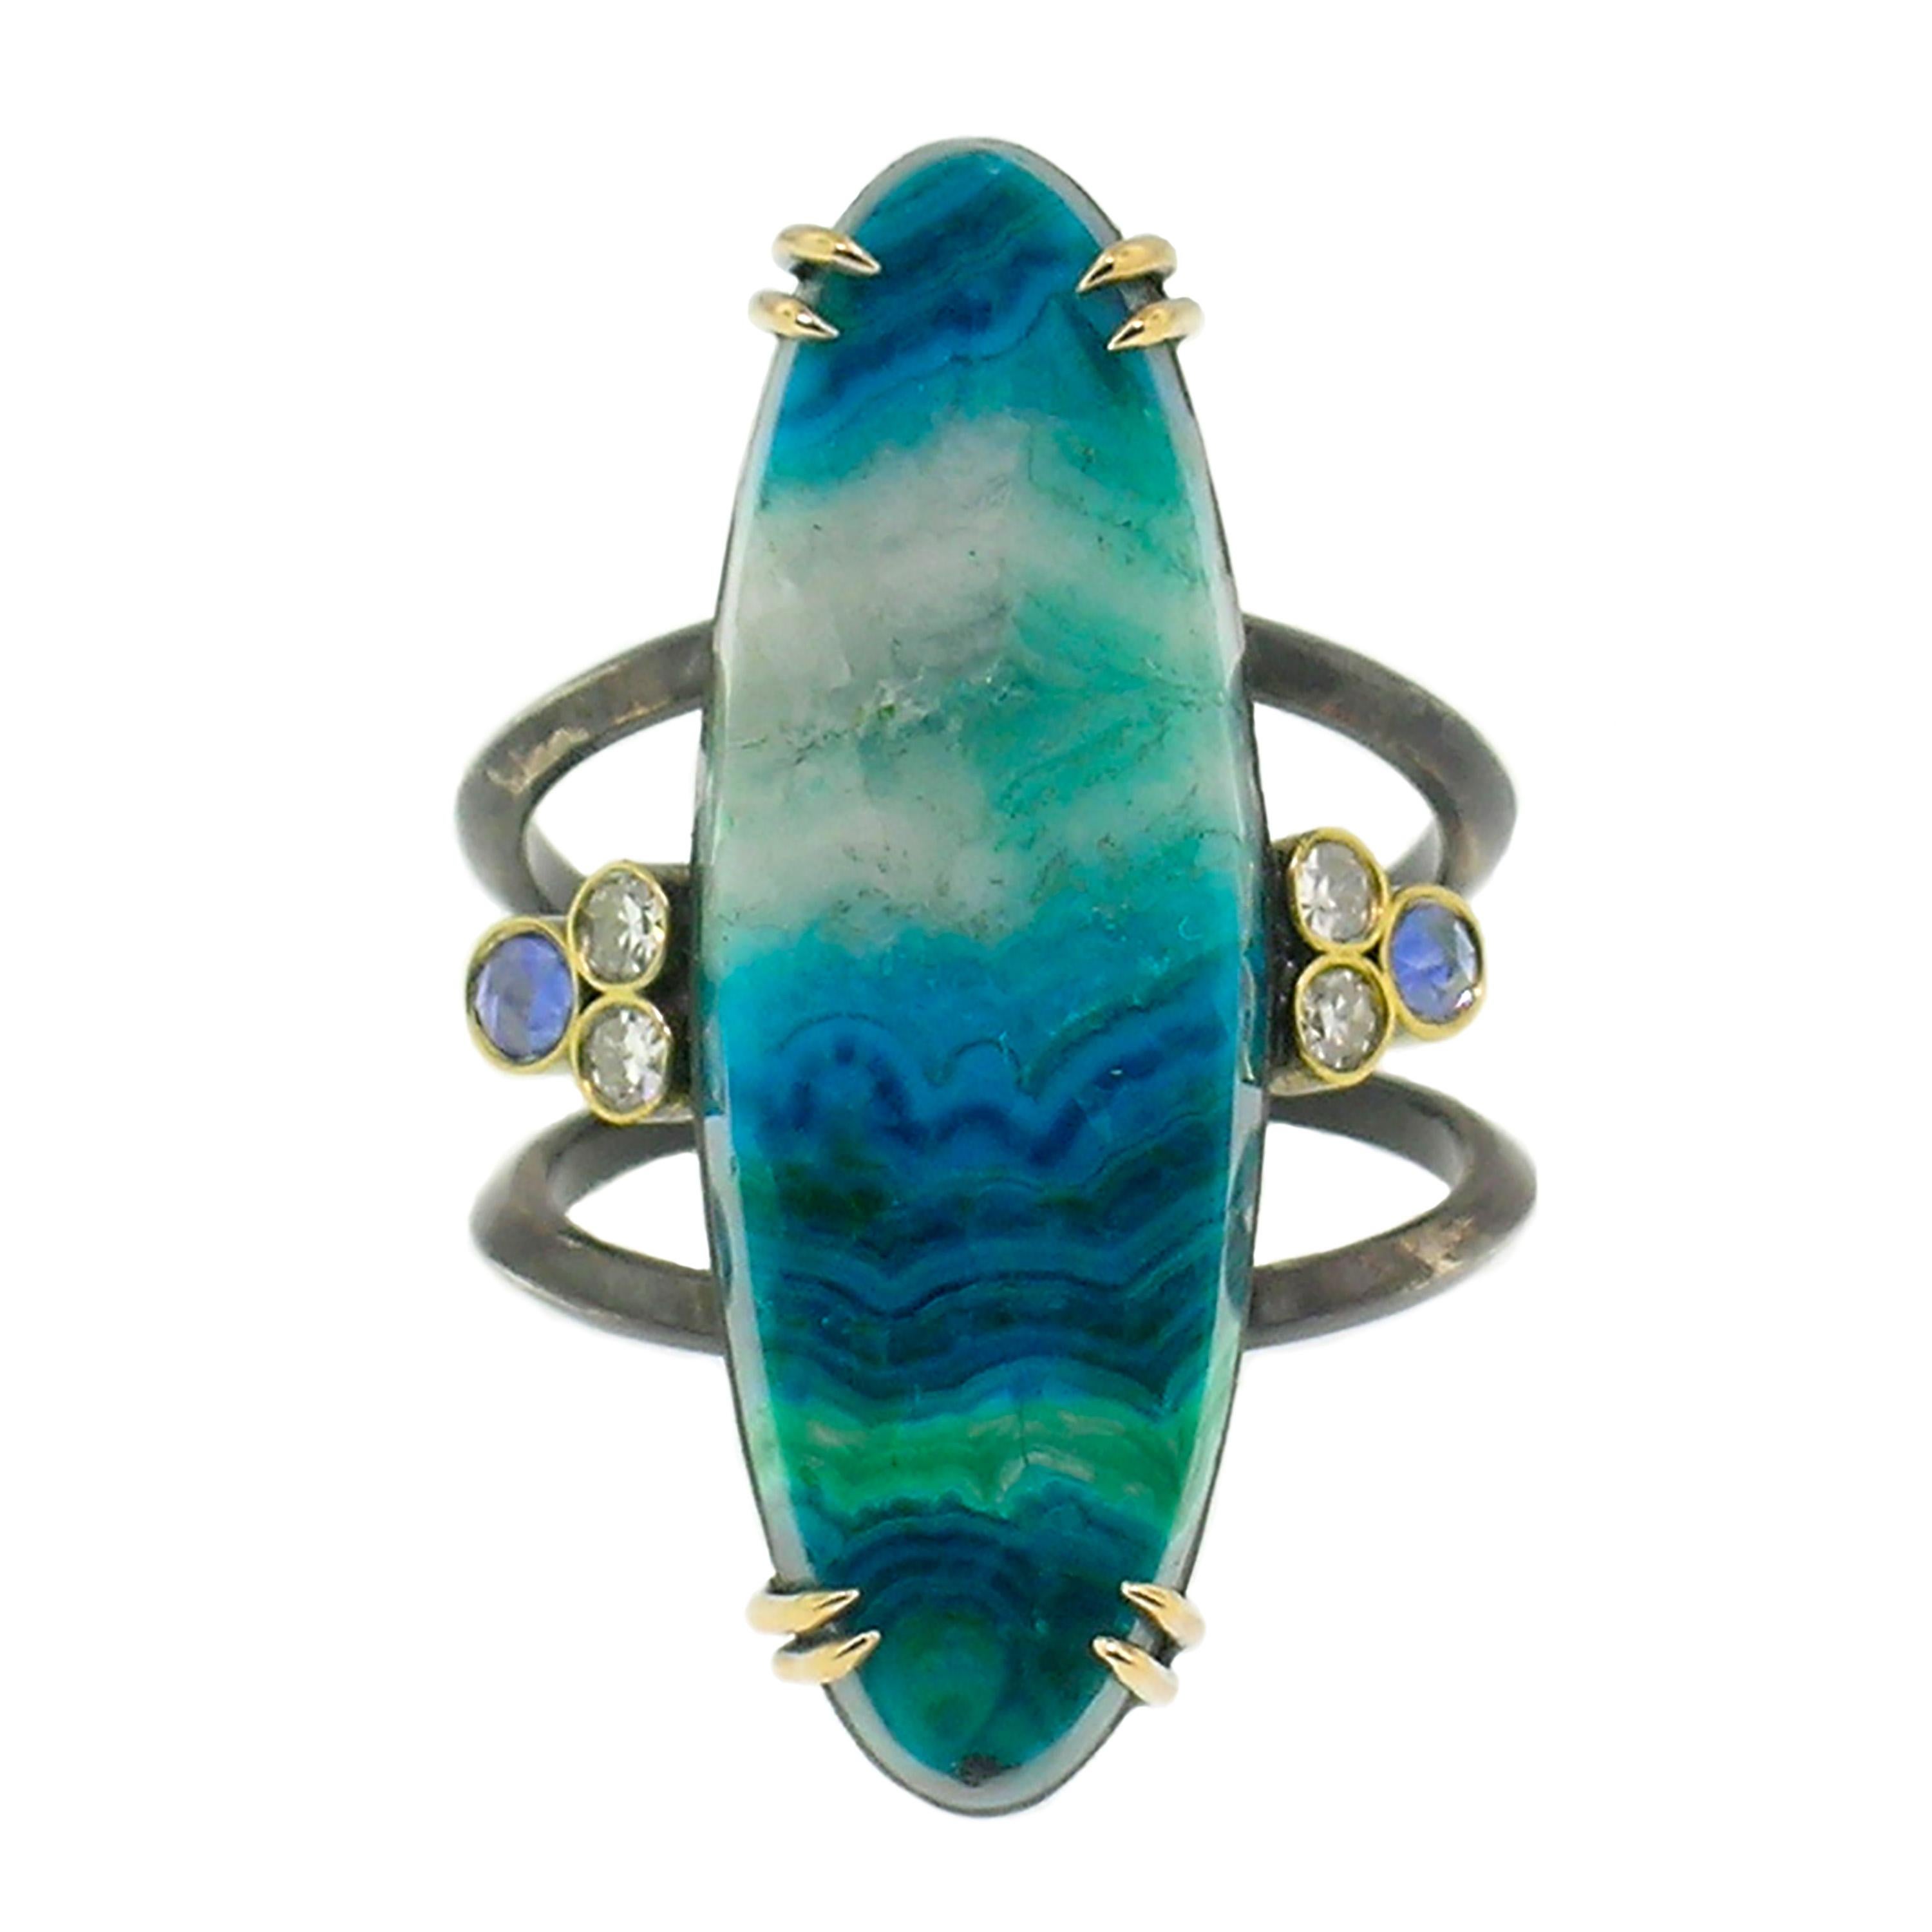 This Shield Ring features a unique specimen of Malachite and Chrysocolla with Quartz from Arizona, chosen for its elegant bands of color and elongated oval shape. The center gemstone is flanked by rose cut blue sapphires and diamonds. 

Shield Rings